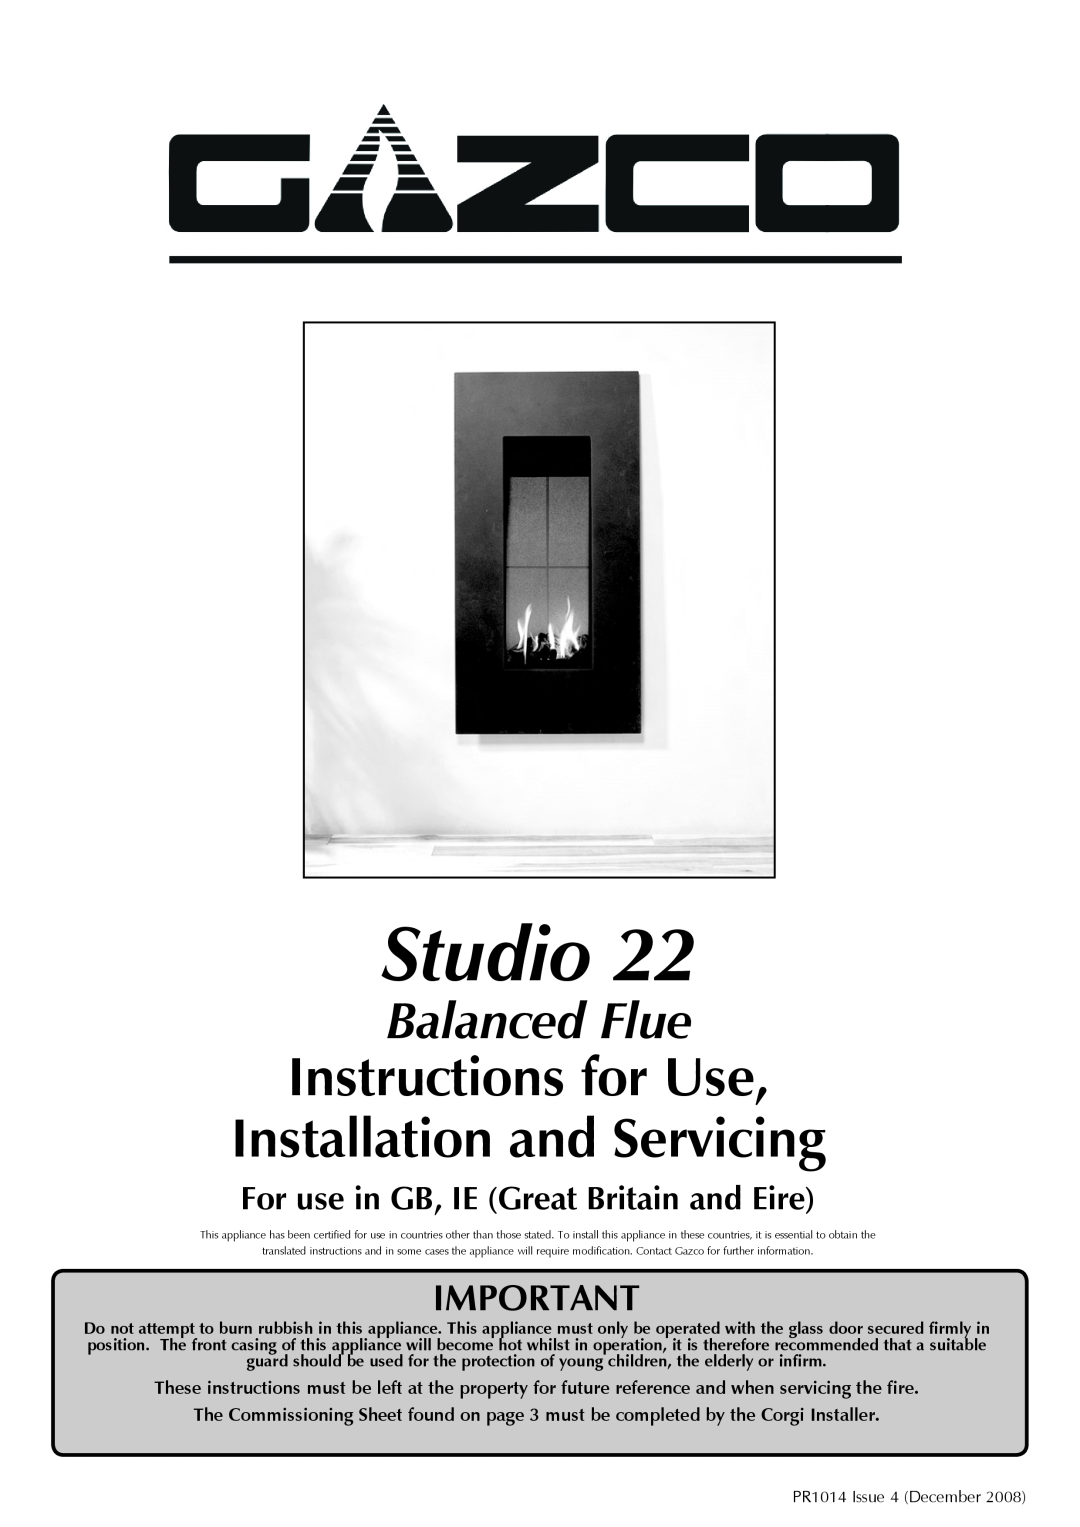 Stovax Studio 22 manual Instructions for Use Installation and Servicing, Balanced Flue 